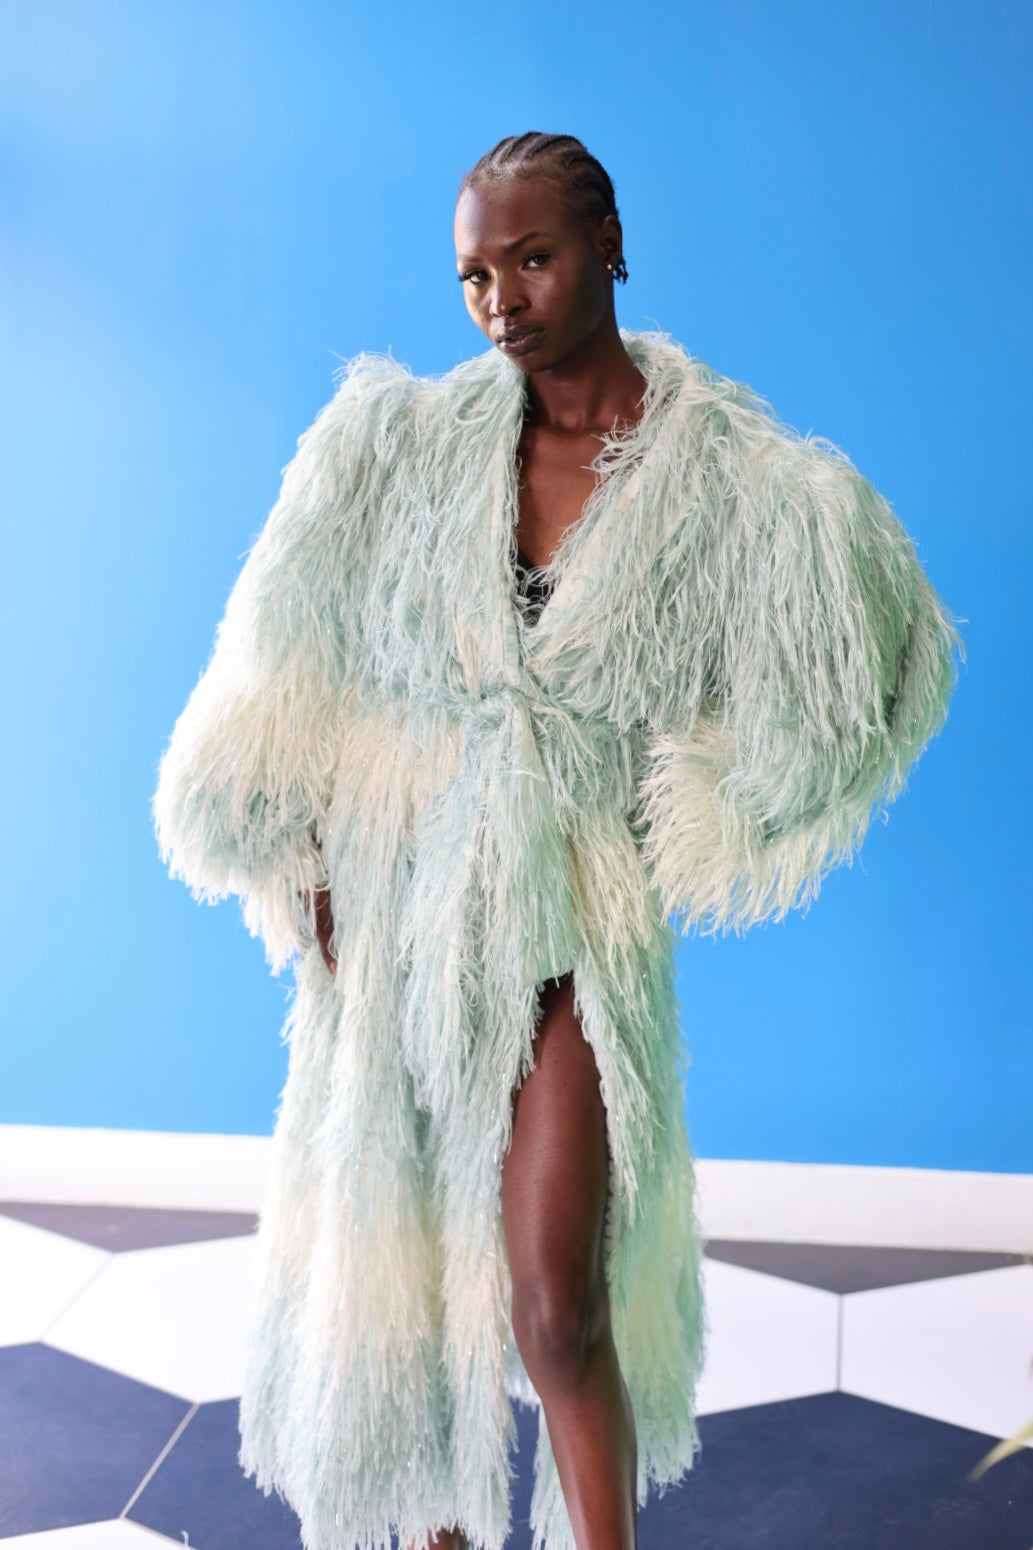 The Enola Shaggy Coat has an ombre effect from light blue to creamy white and is suitable for a wide range of body types, giving everyone a gorgeous silhouette.